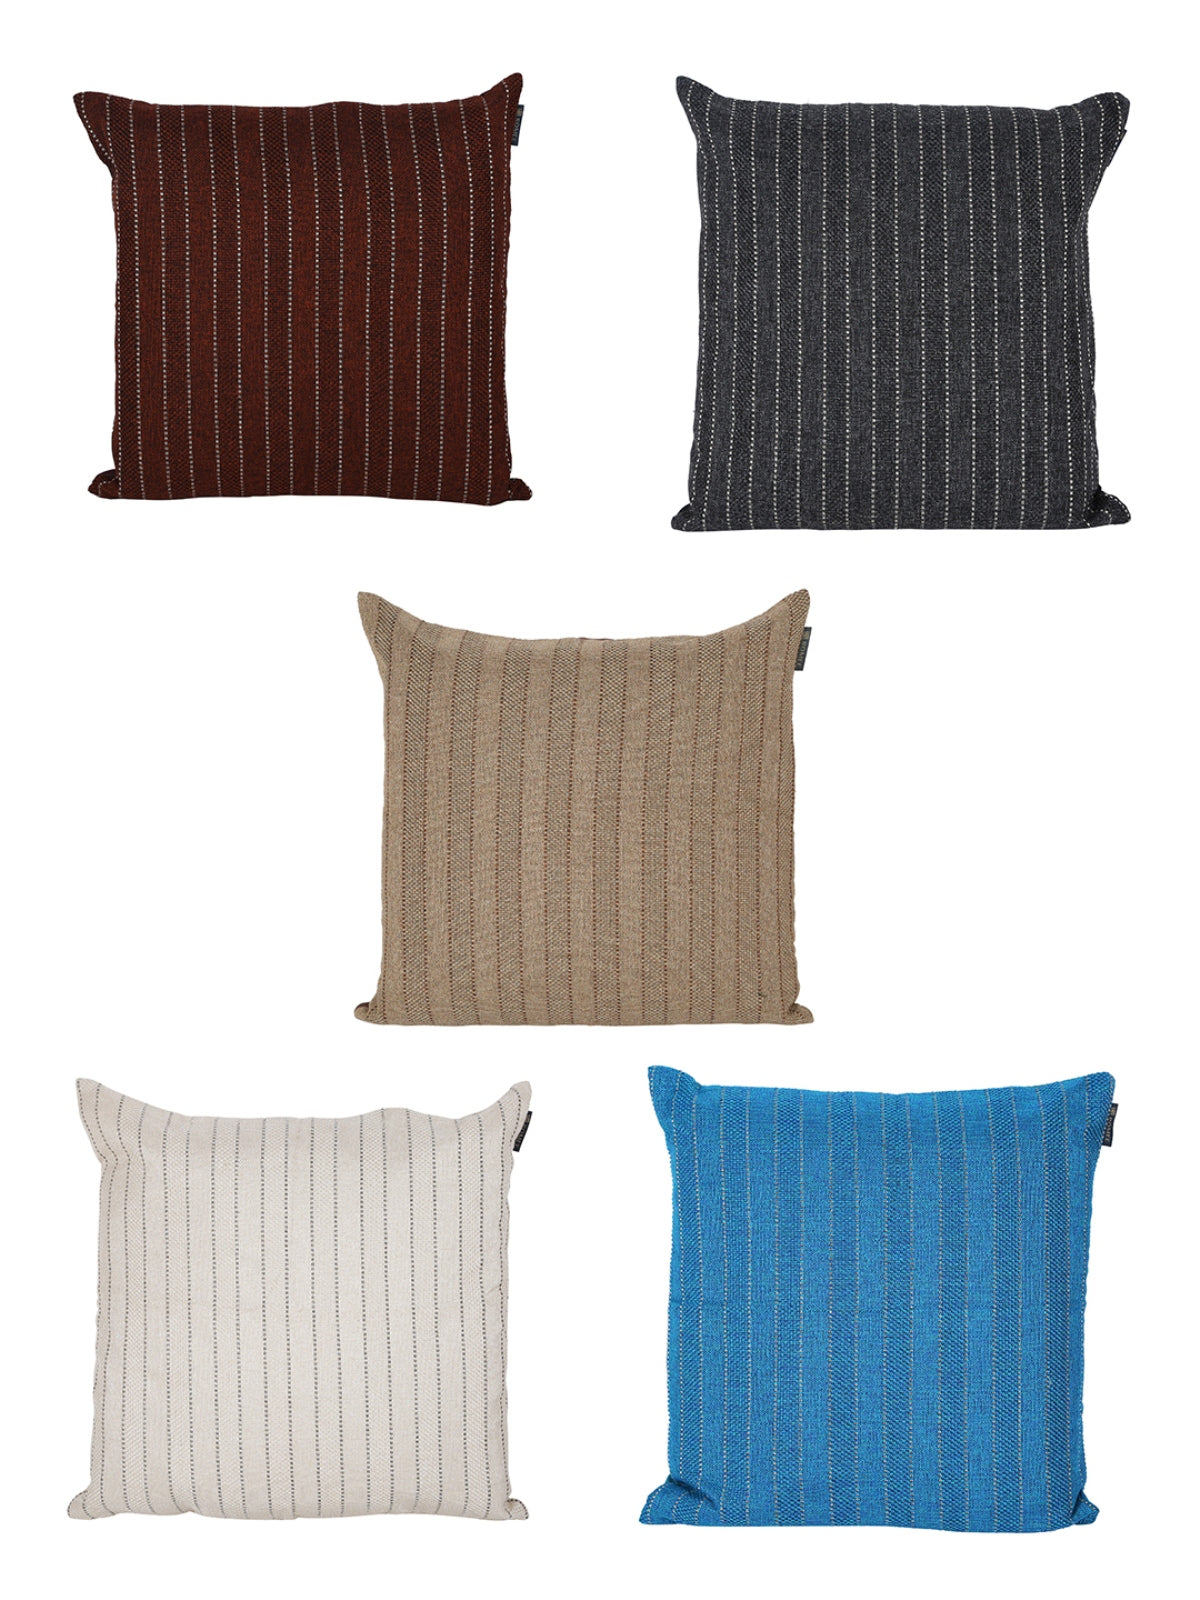 Soft Polyester Jute Plain Solid Cushion Covers 16 inch x 16 inch, Set of 5 - Multicolor